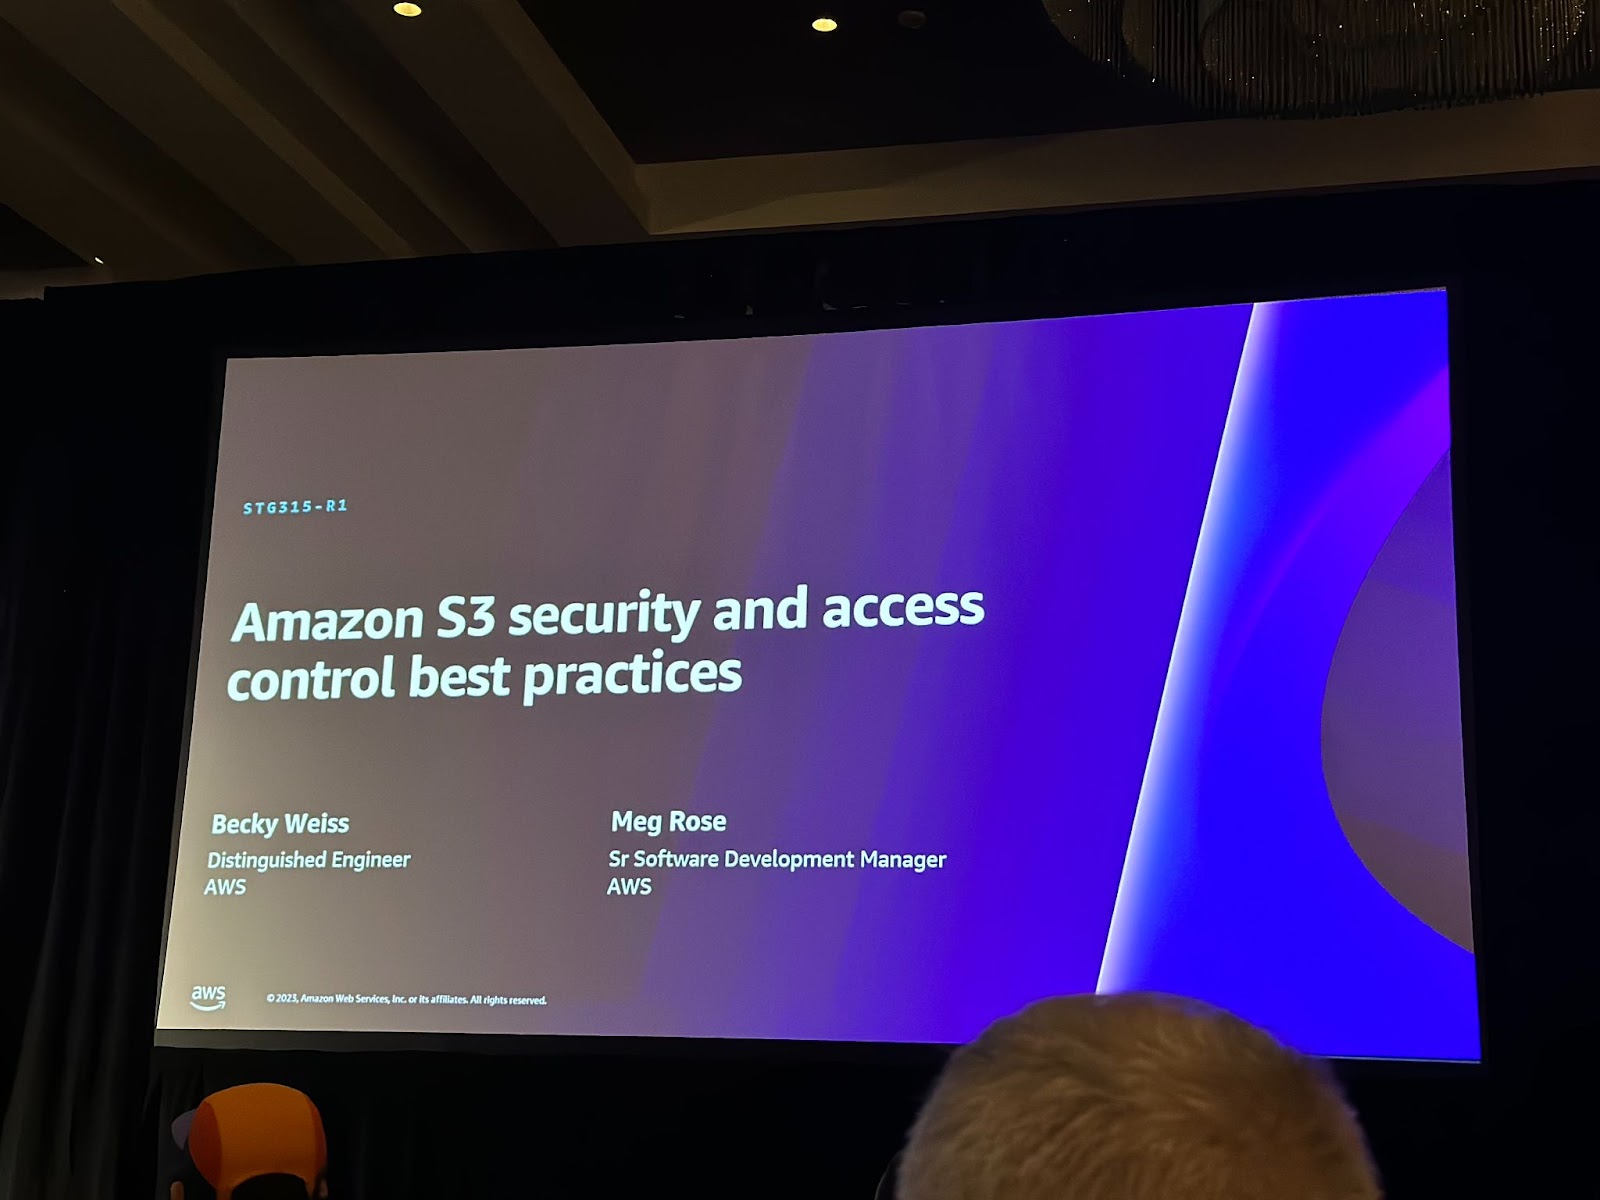 Amazon S3 security and access control best practices